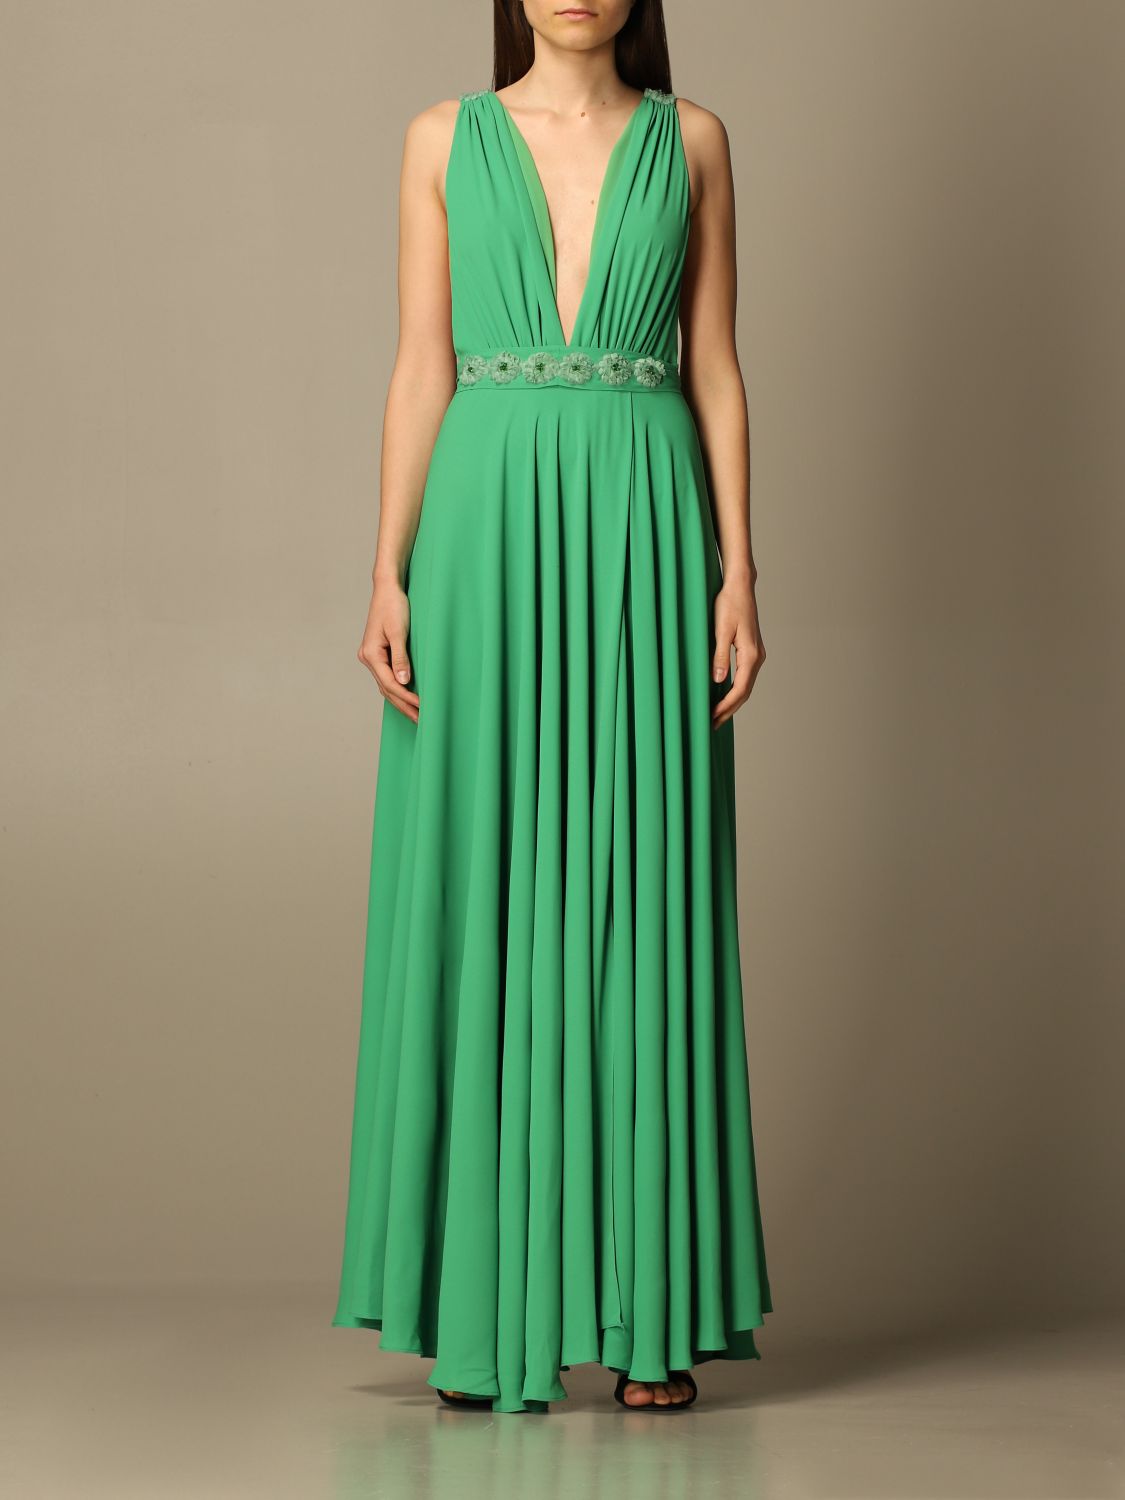 H COUTURE: Dress women - Green | Dress H Couture H.V2813 3122 GIGLIO.COM